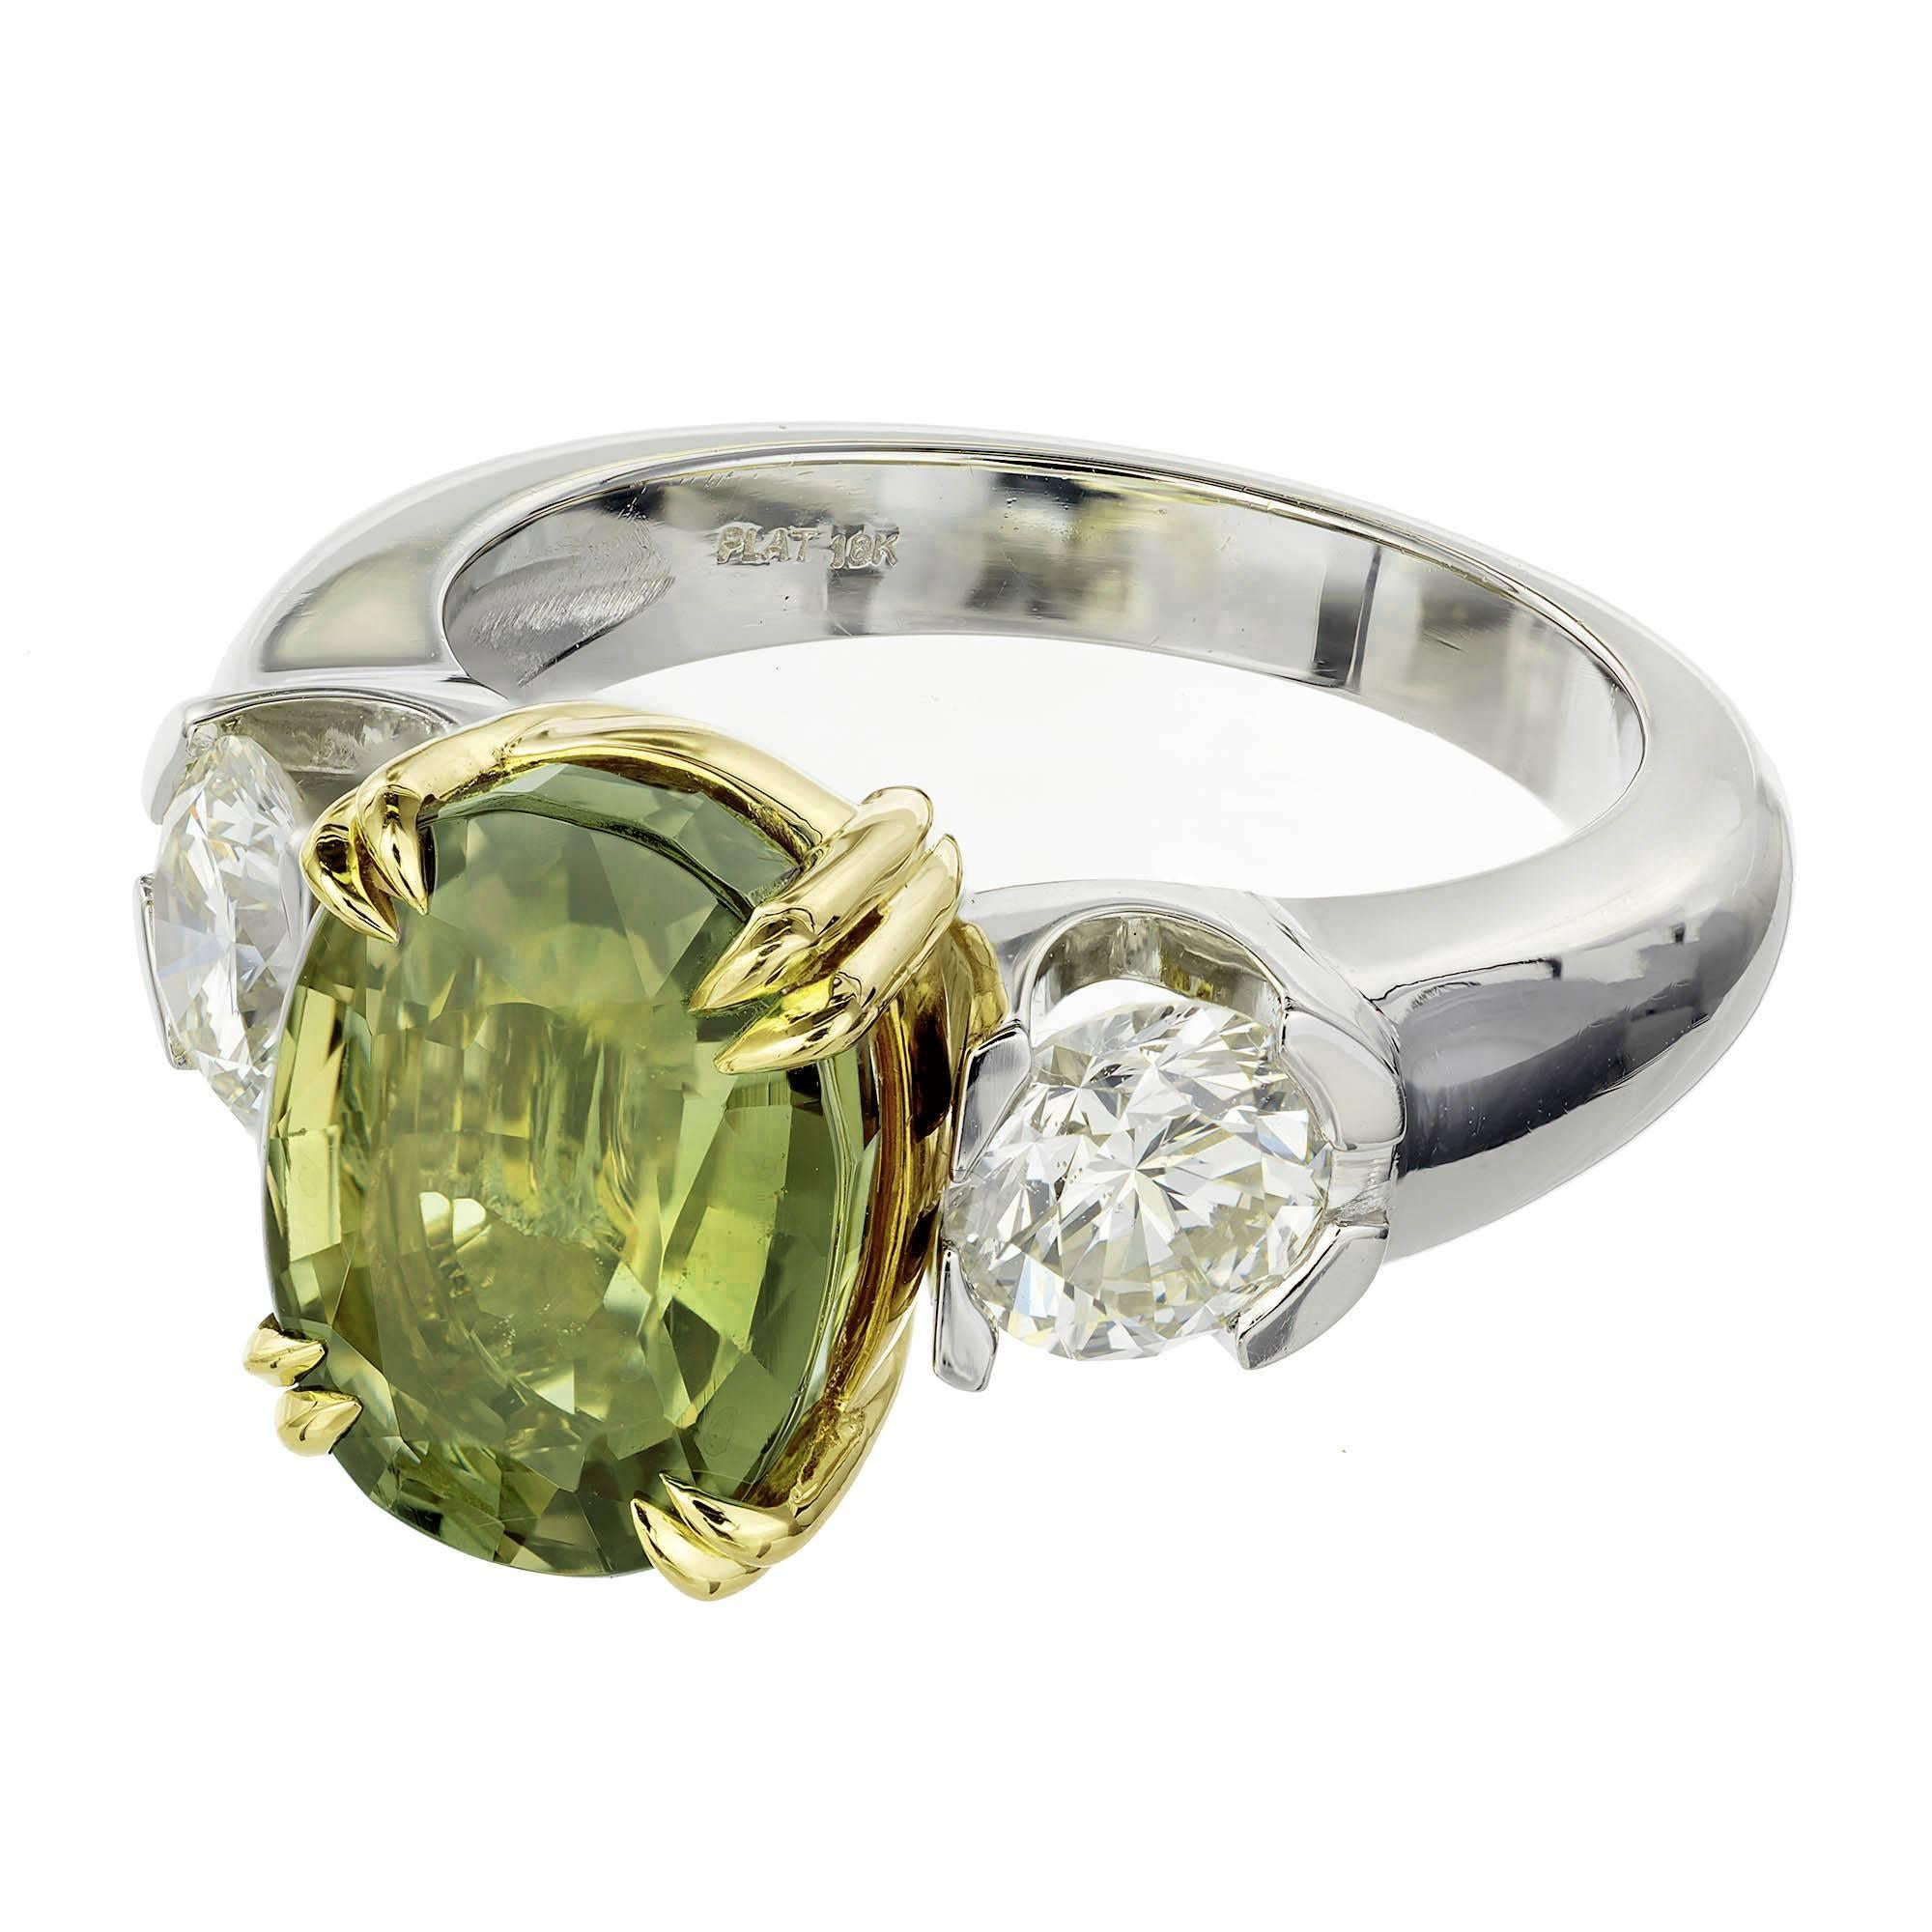 GIA certified natural oval Alexandrite and diamond three-stone engagement ring. moderate color change. The Alexandrite is from an estate. The platinum and 18k yellow gold setting is handmade in the Peter Suchy workshop.

1 natural yellowish green,